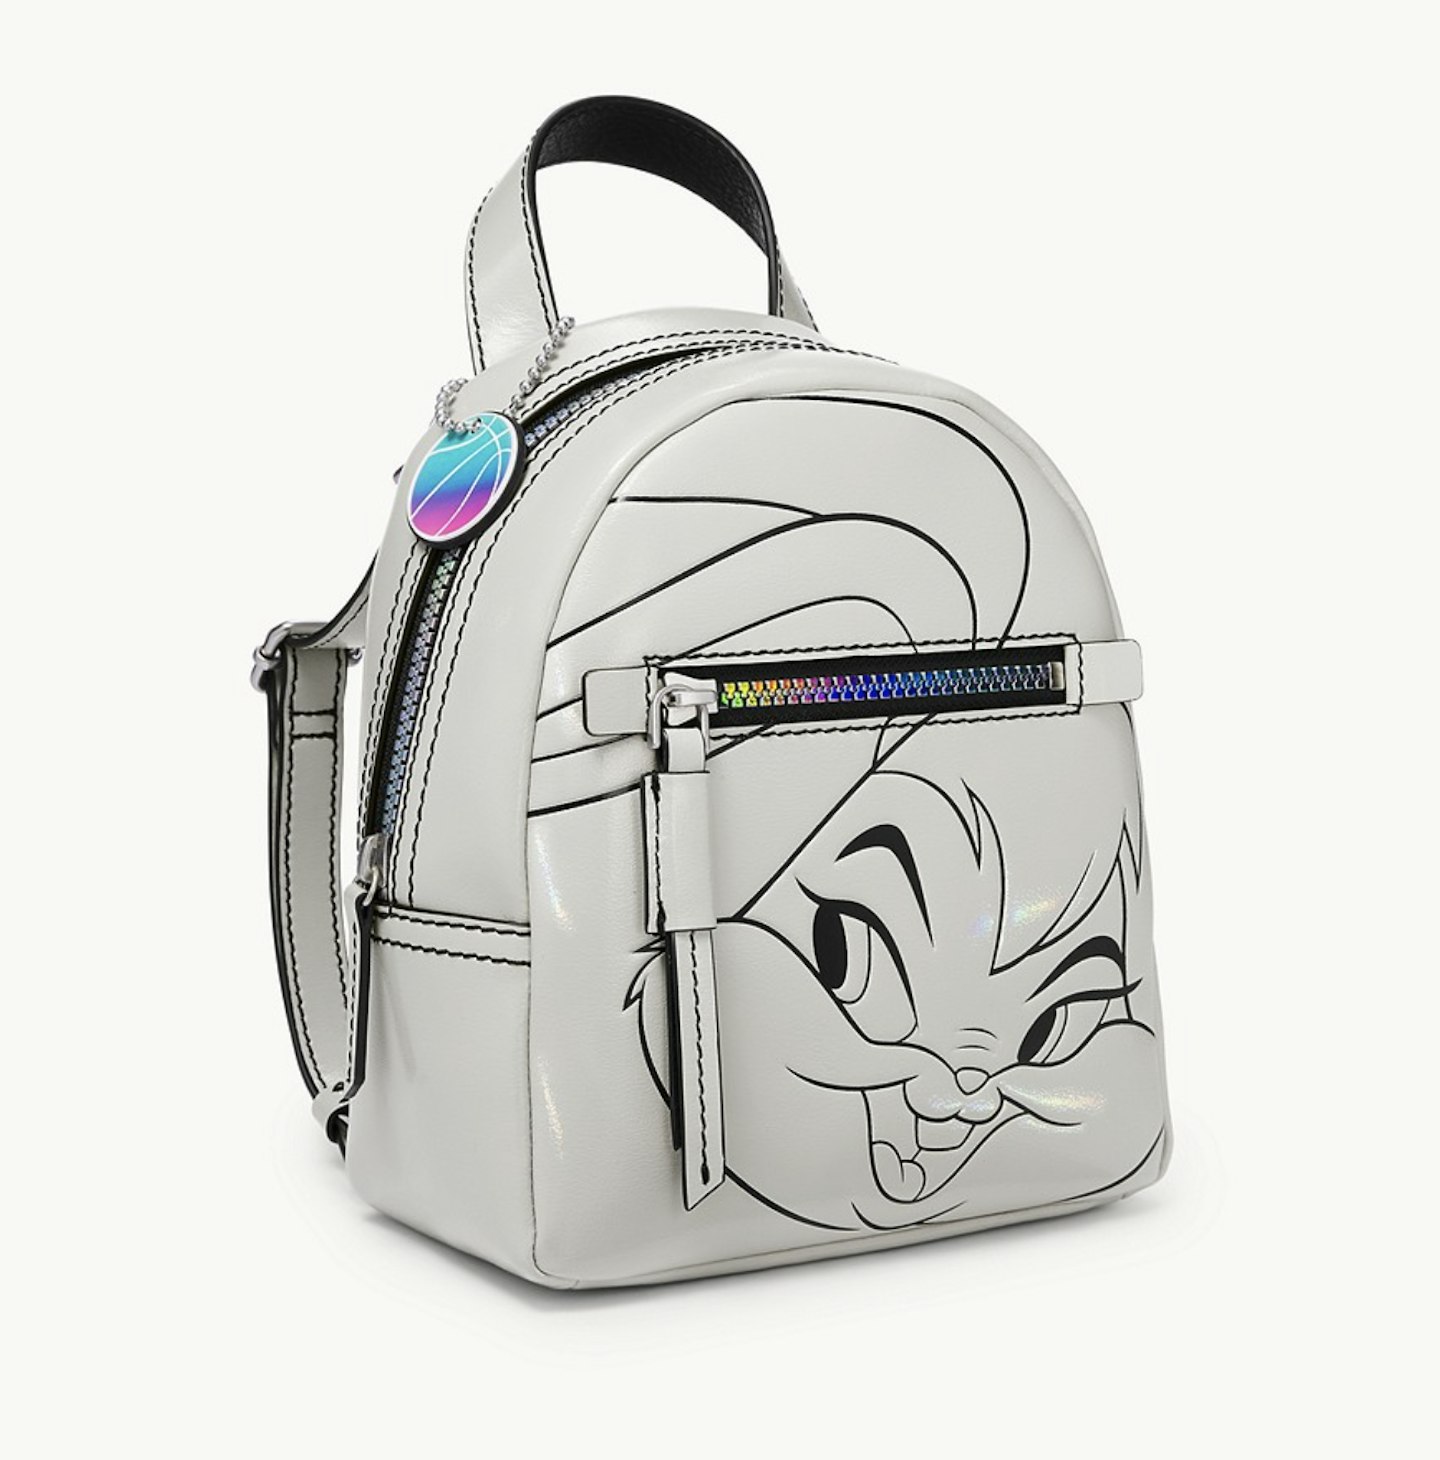 Space Jam by Fossil Megan Small Backpack